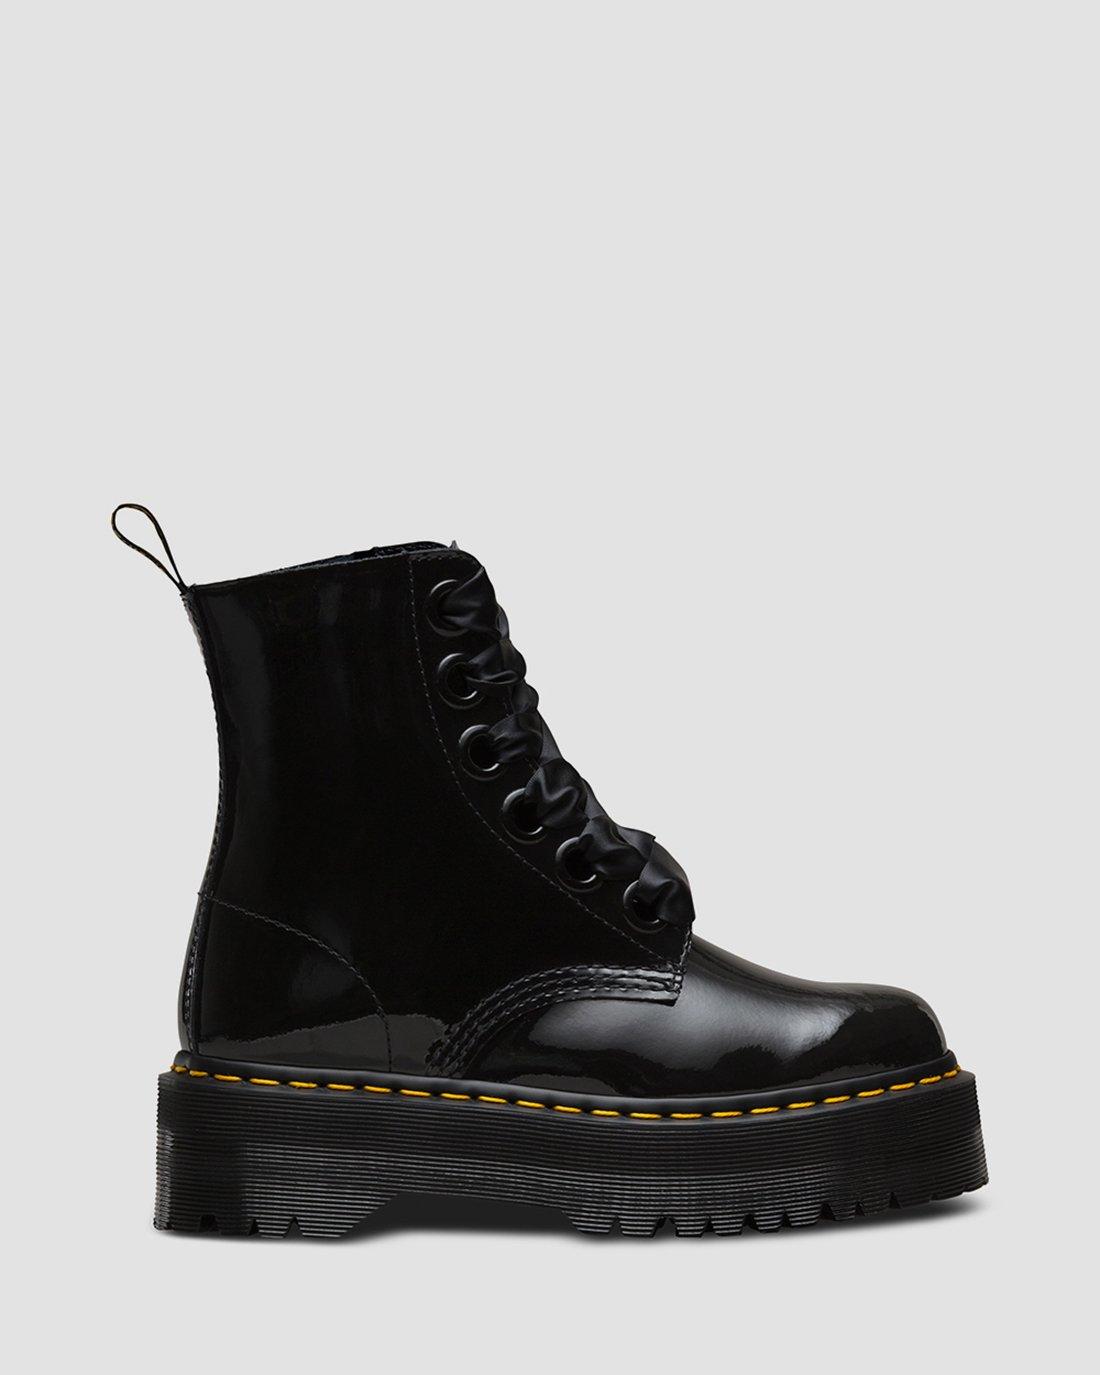 MOLLY | Dr. Martens Official